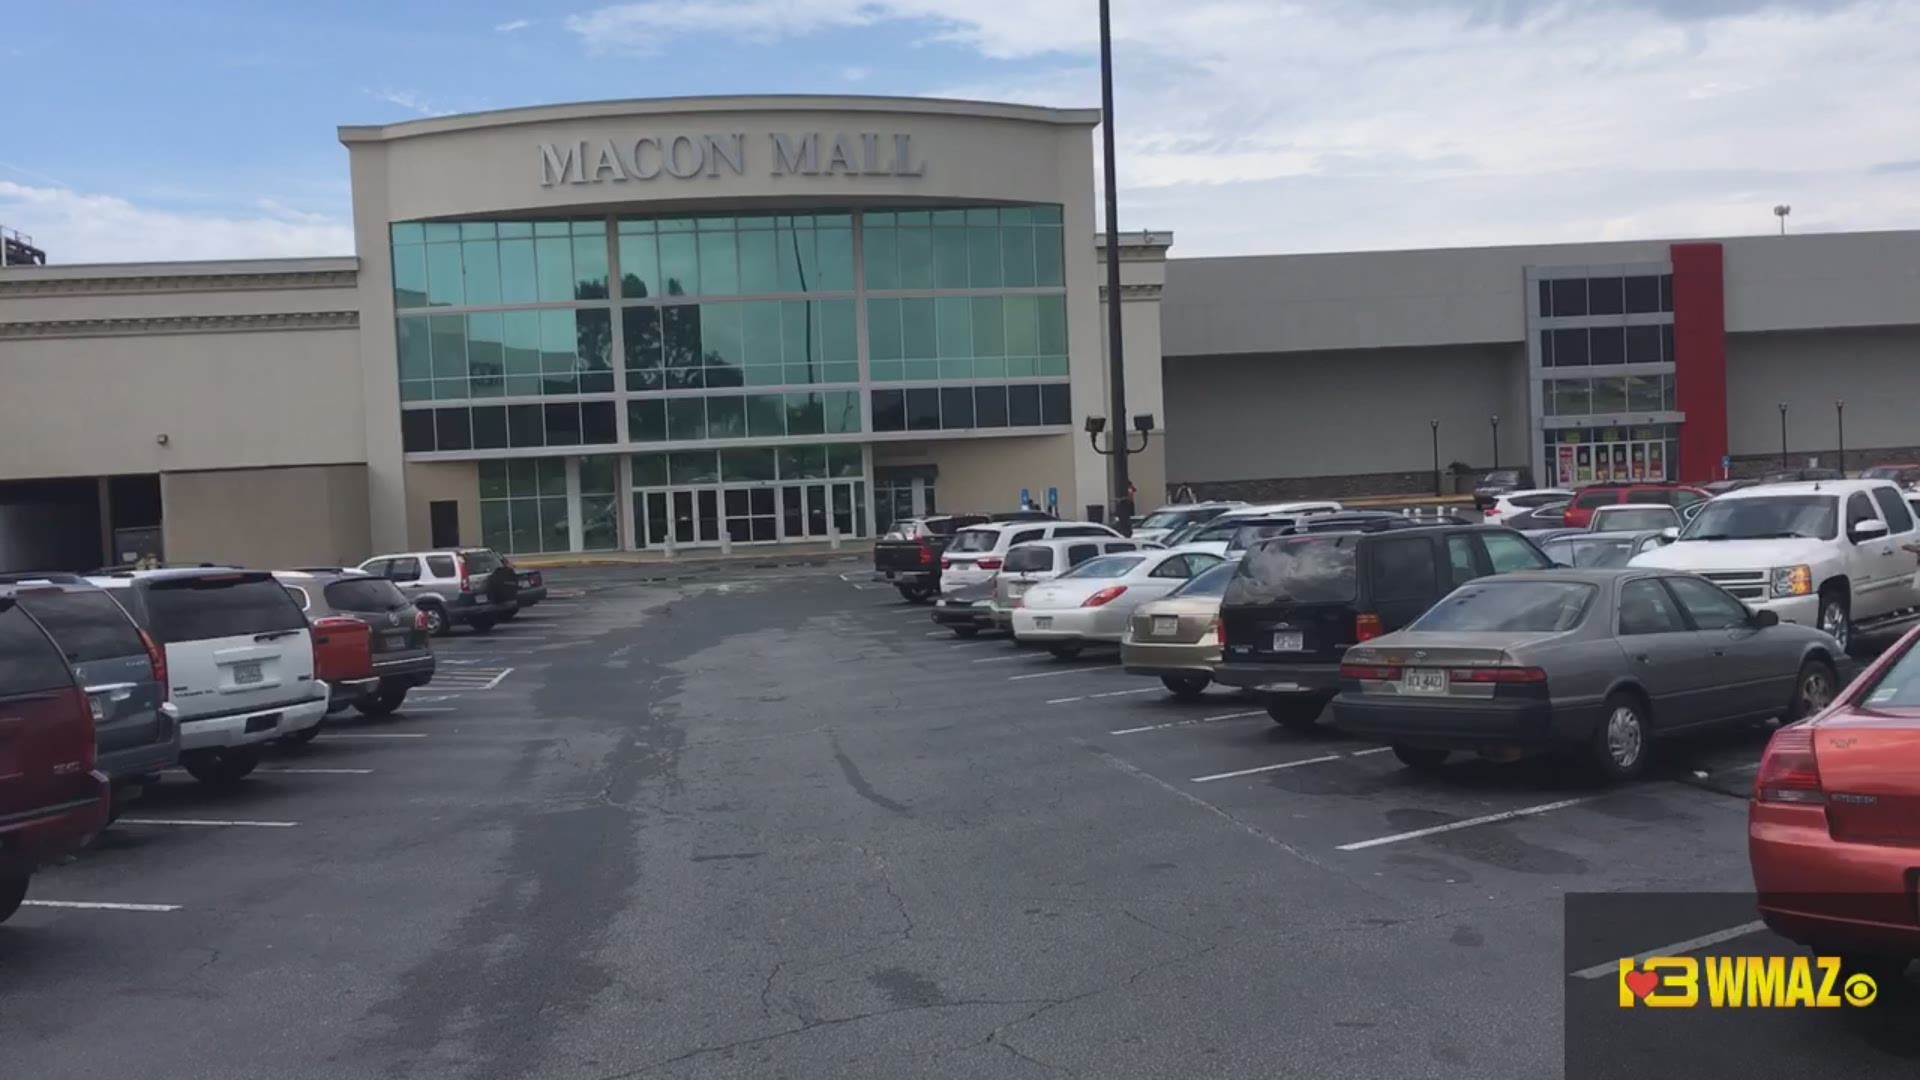 Macon Mall opened in 1975 and continues to battle changing times and a volatile national retail climate.